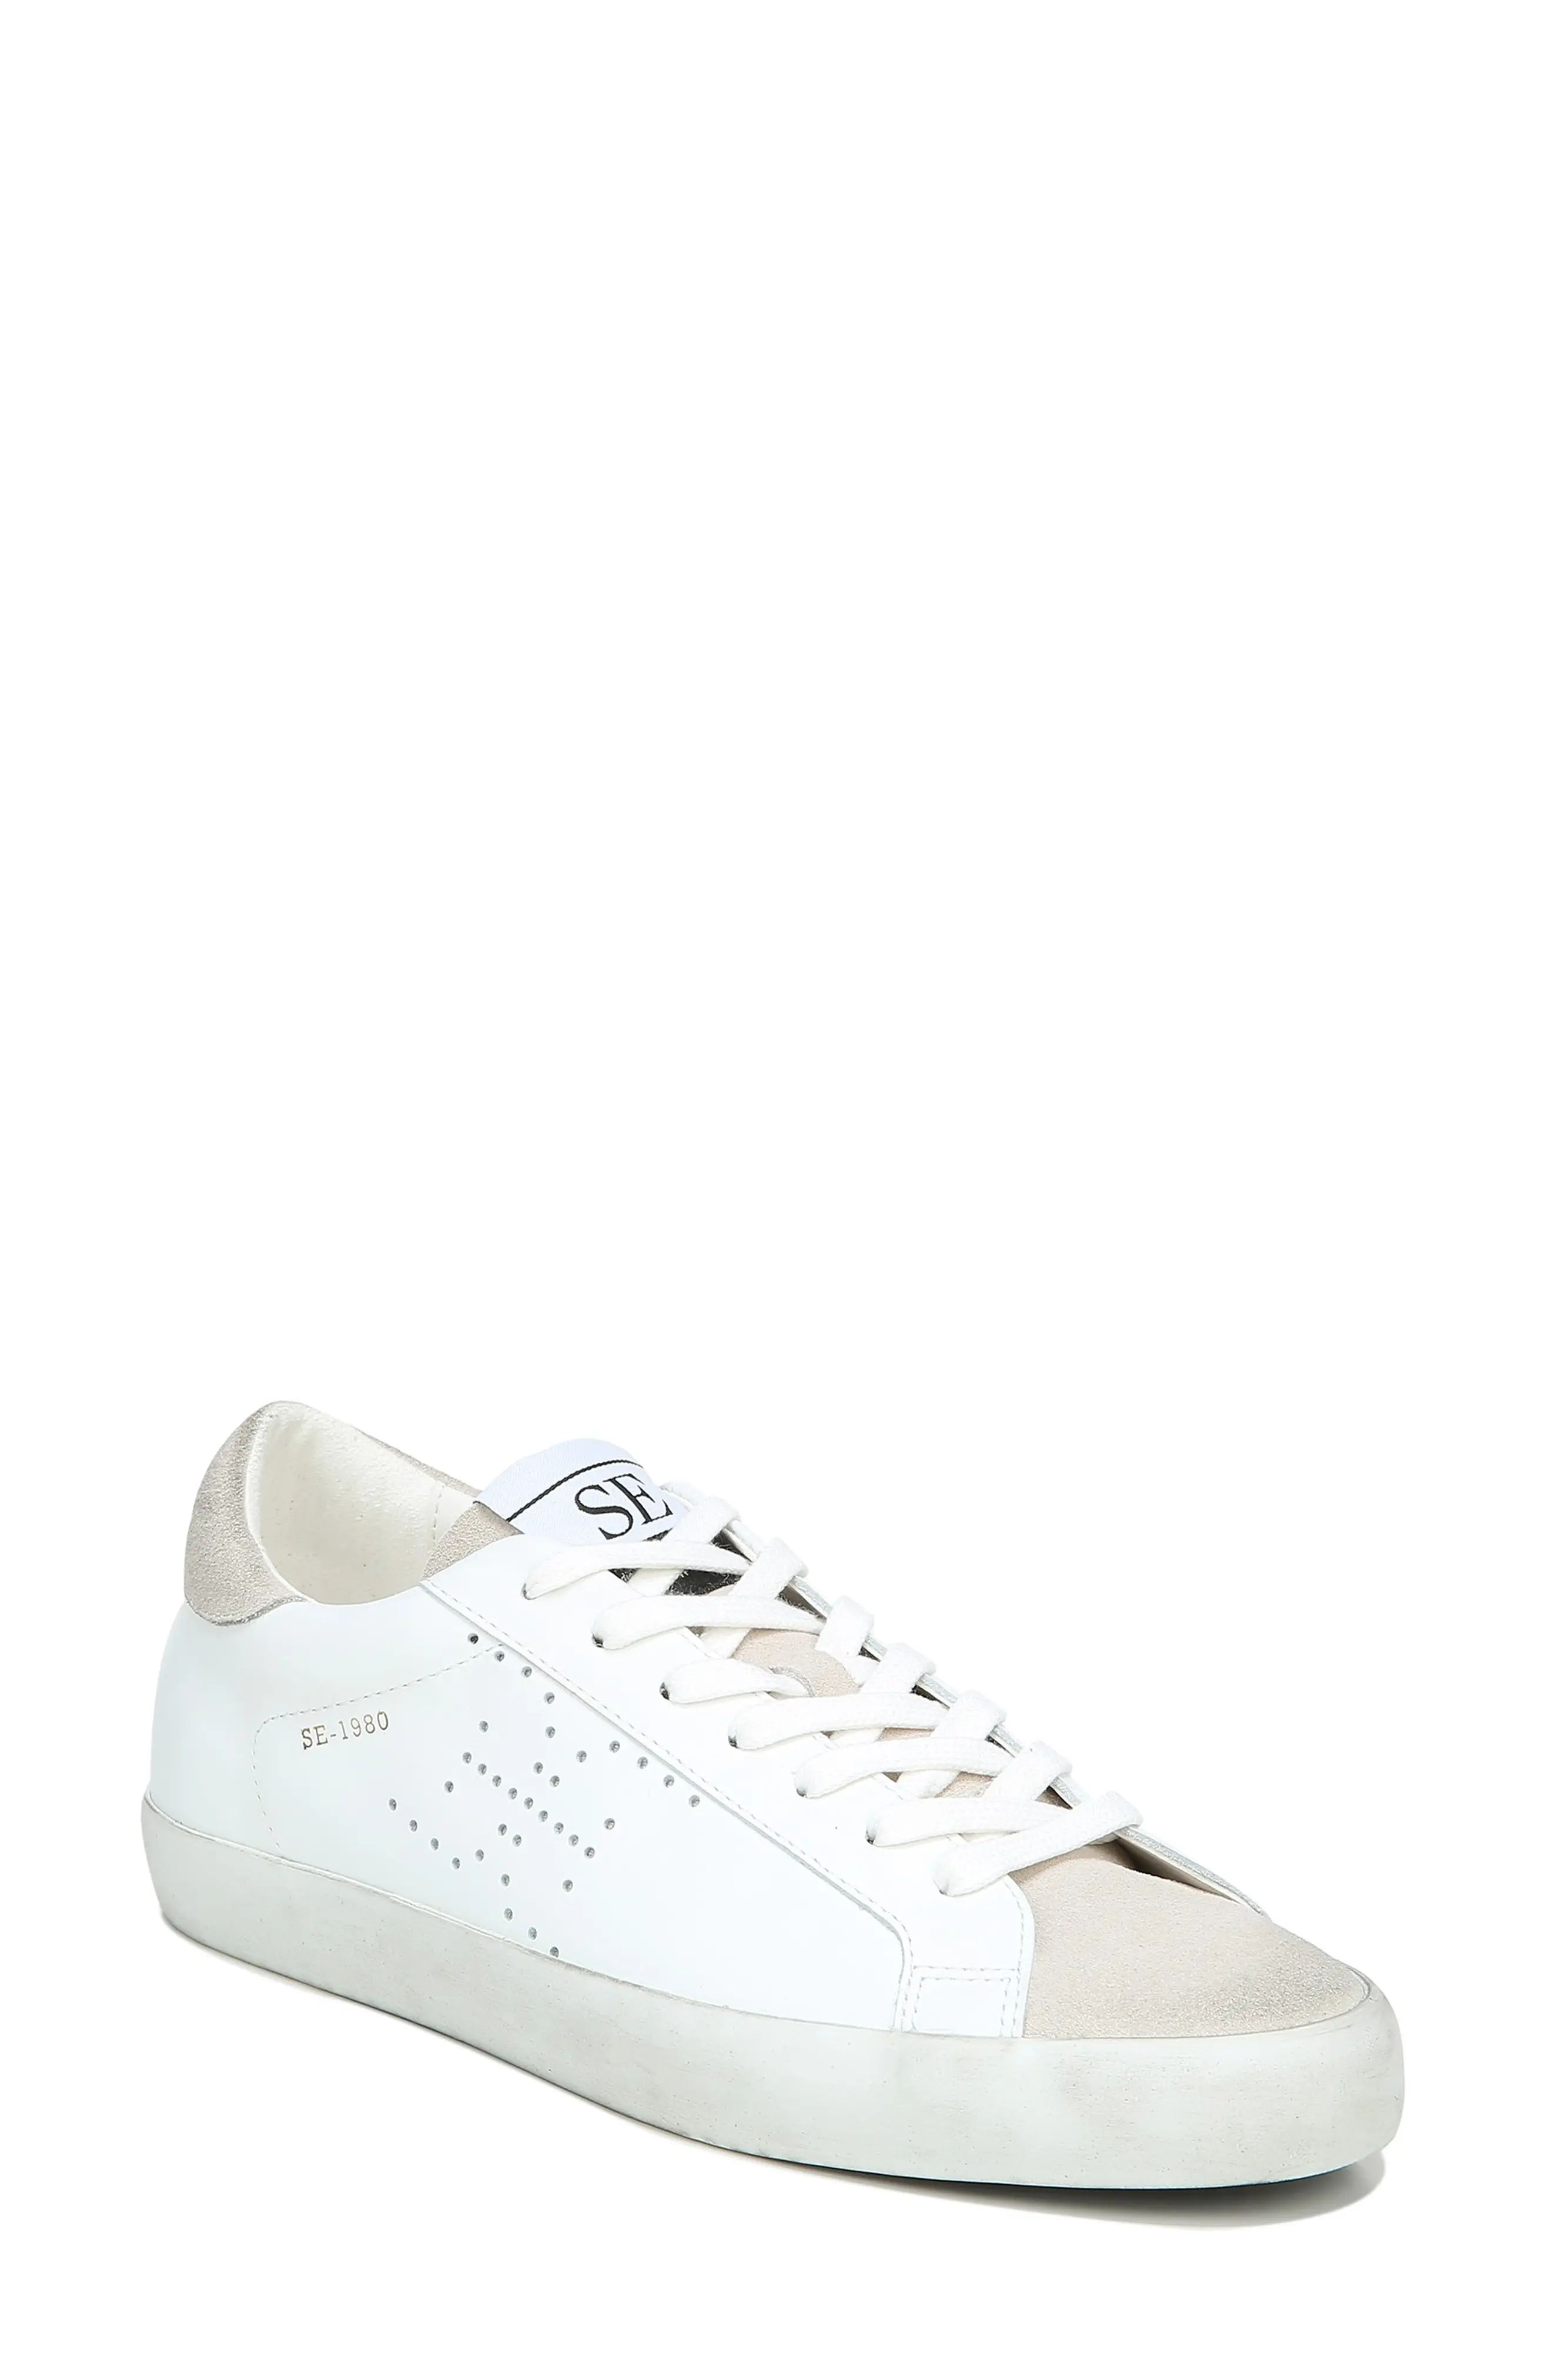 Sam Edelman Aubrie Sneaker, Size 7.5 in Bright White/Greige Leather at Nordstrom | Nordstrom